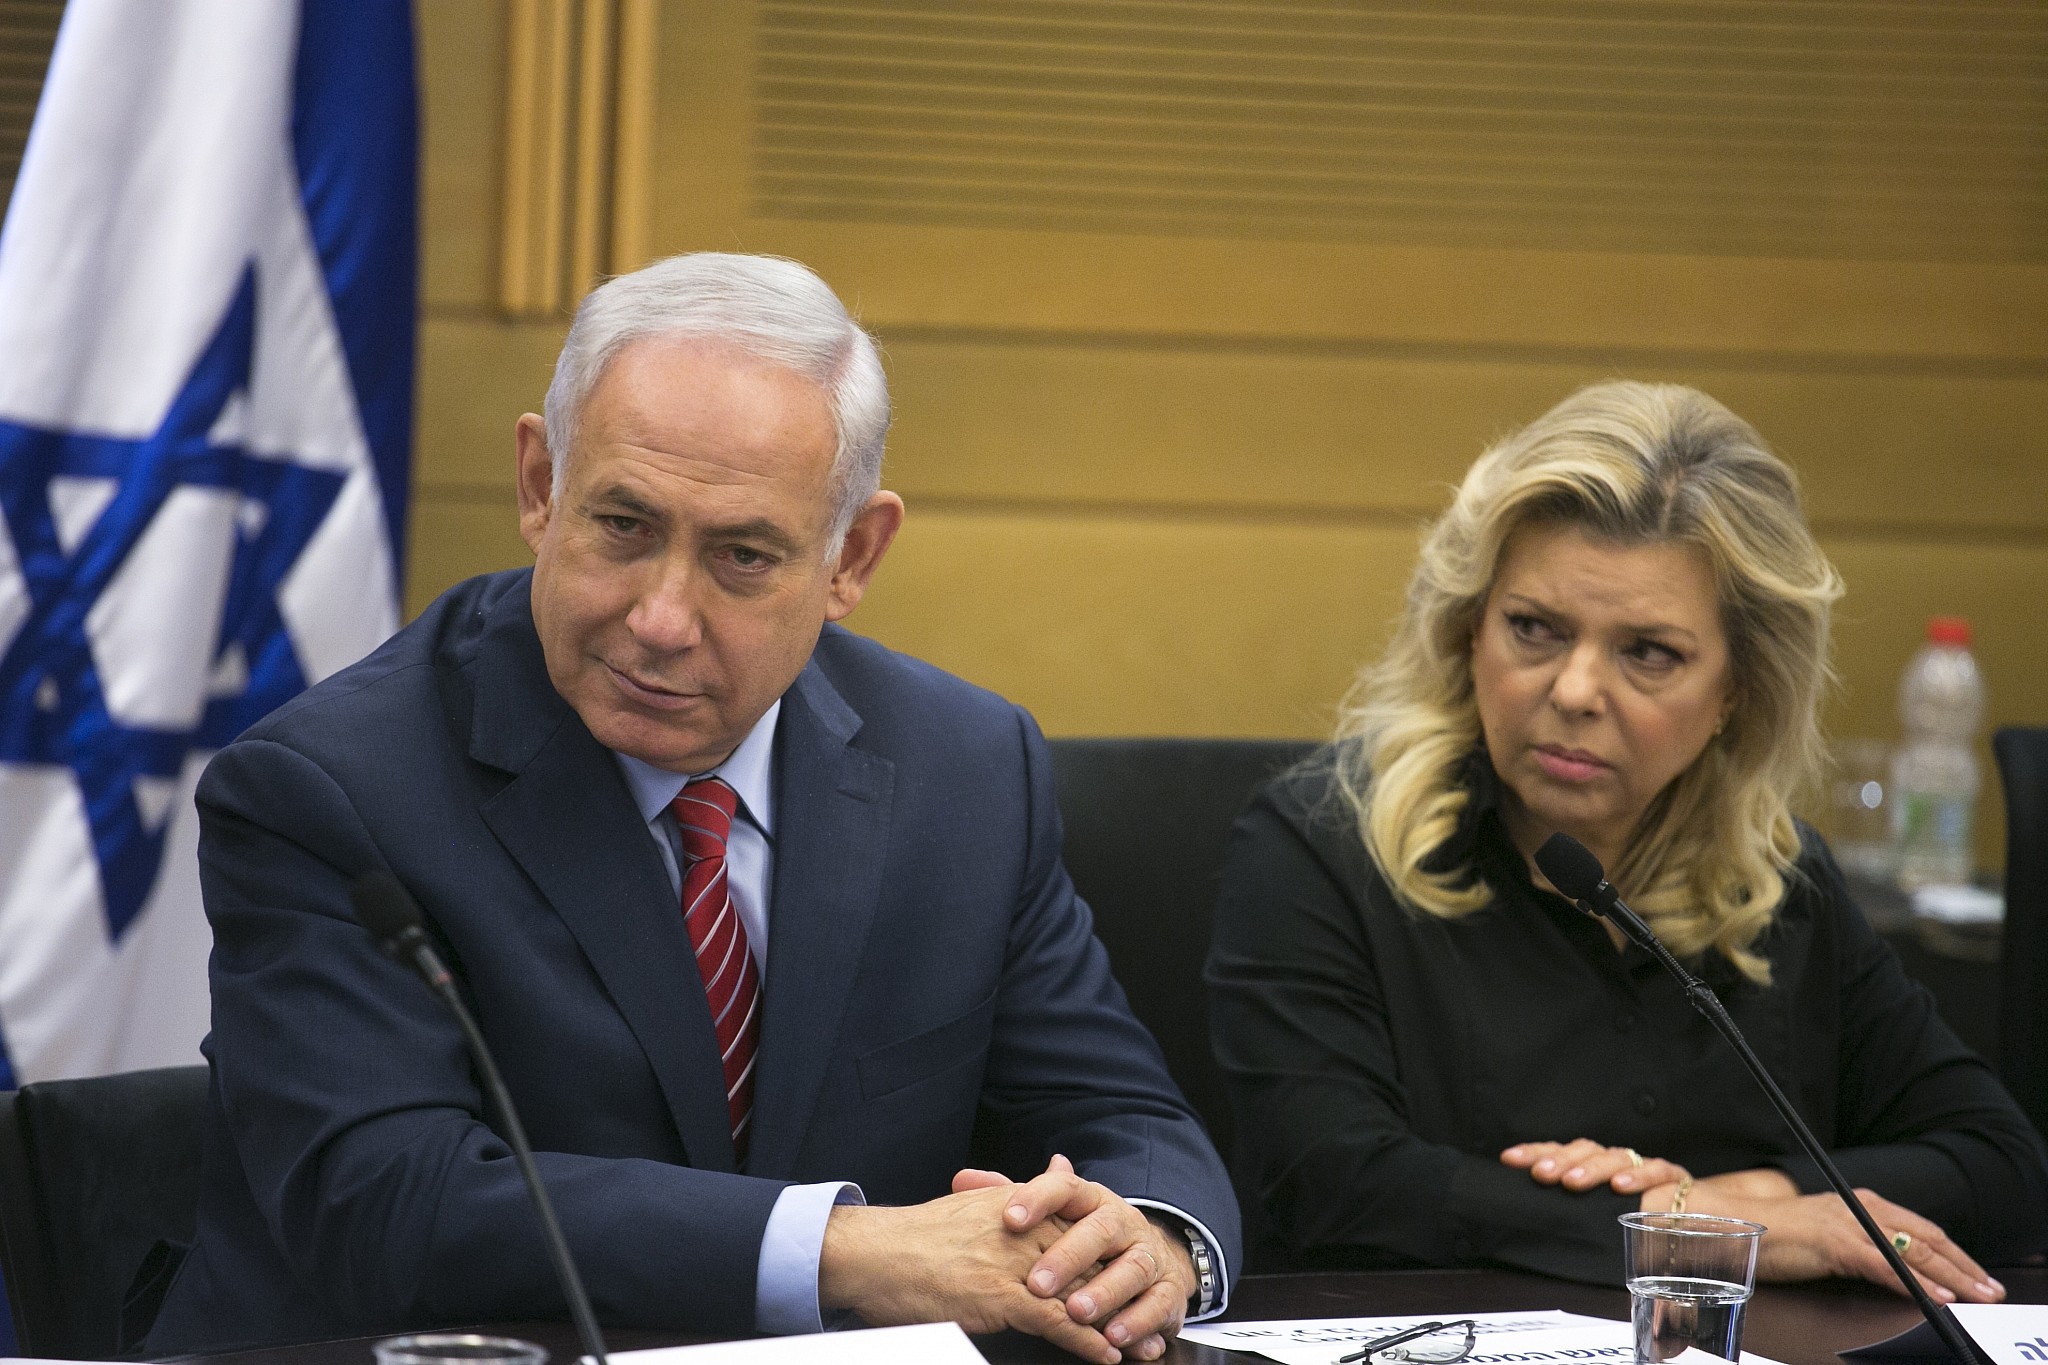 After tape of irate wife leaks, Netanyahu tells media to back off | The